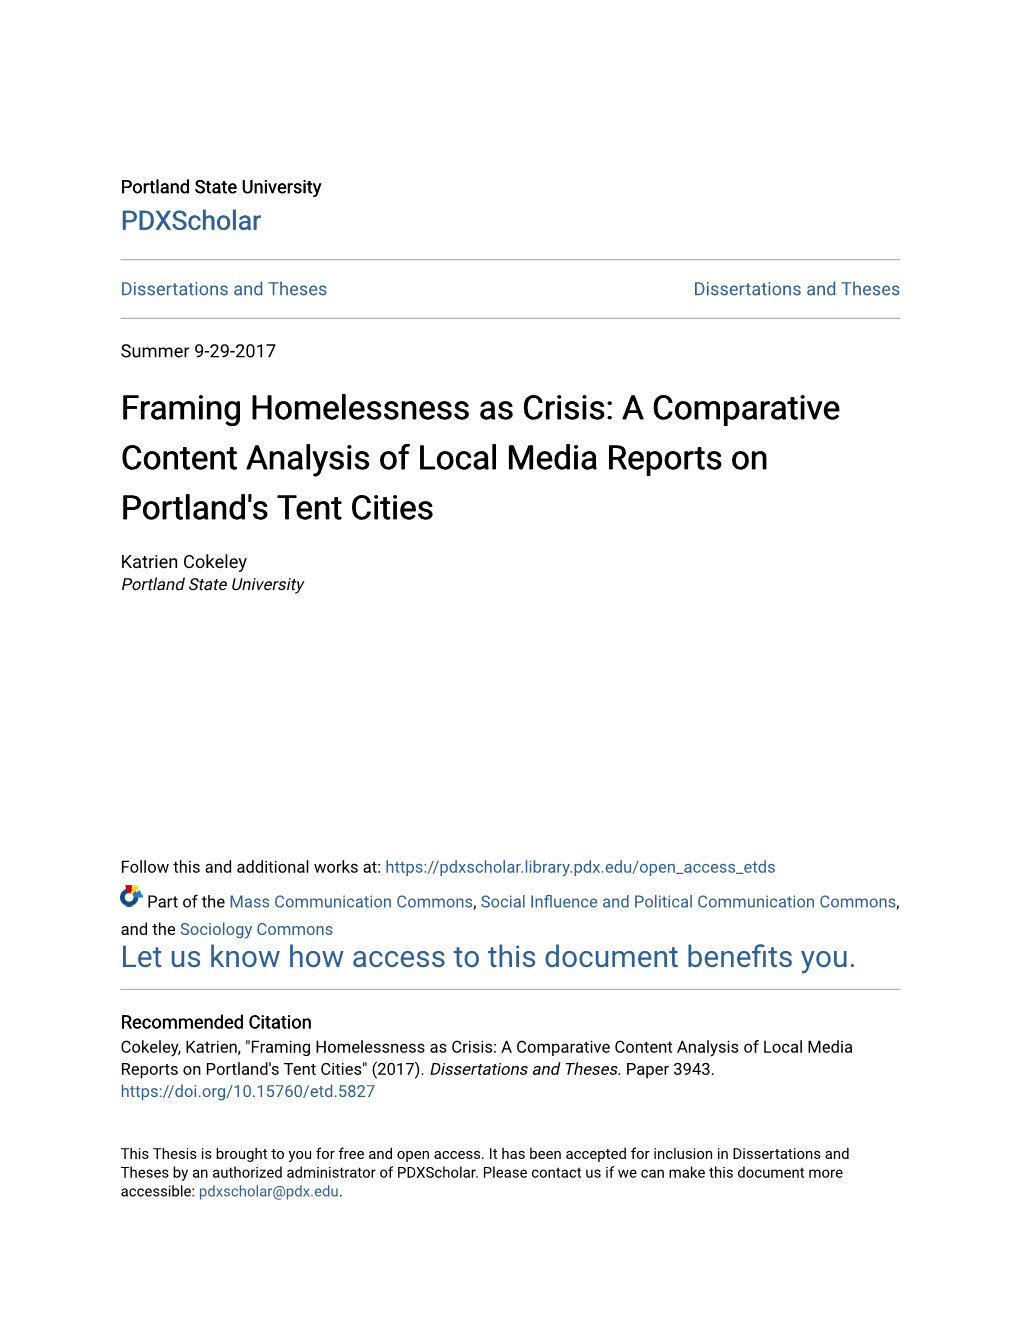 Framing Homelessness As Crisis: a Comparative Content Analysis of Local Media Reports on Portland's Tent Cities